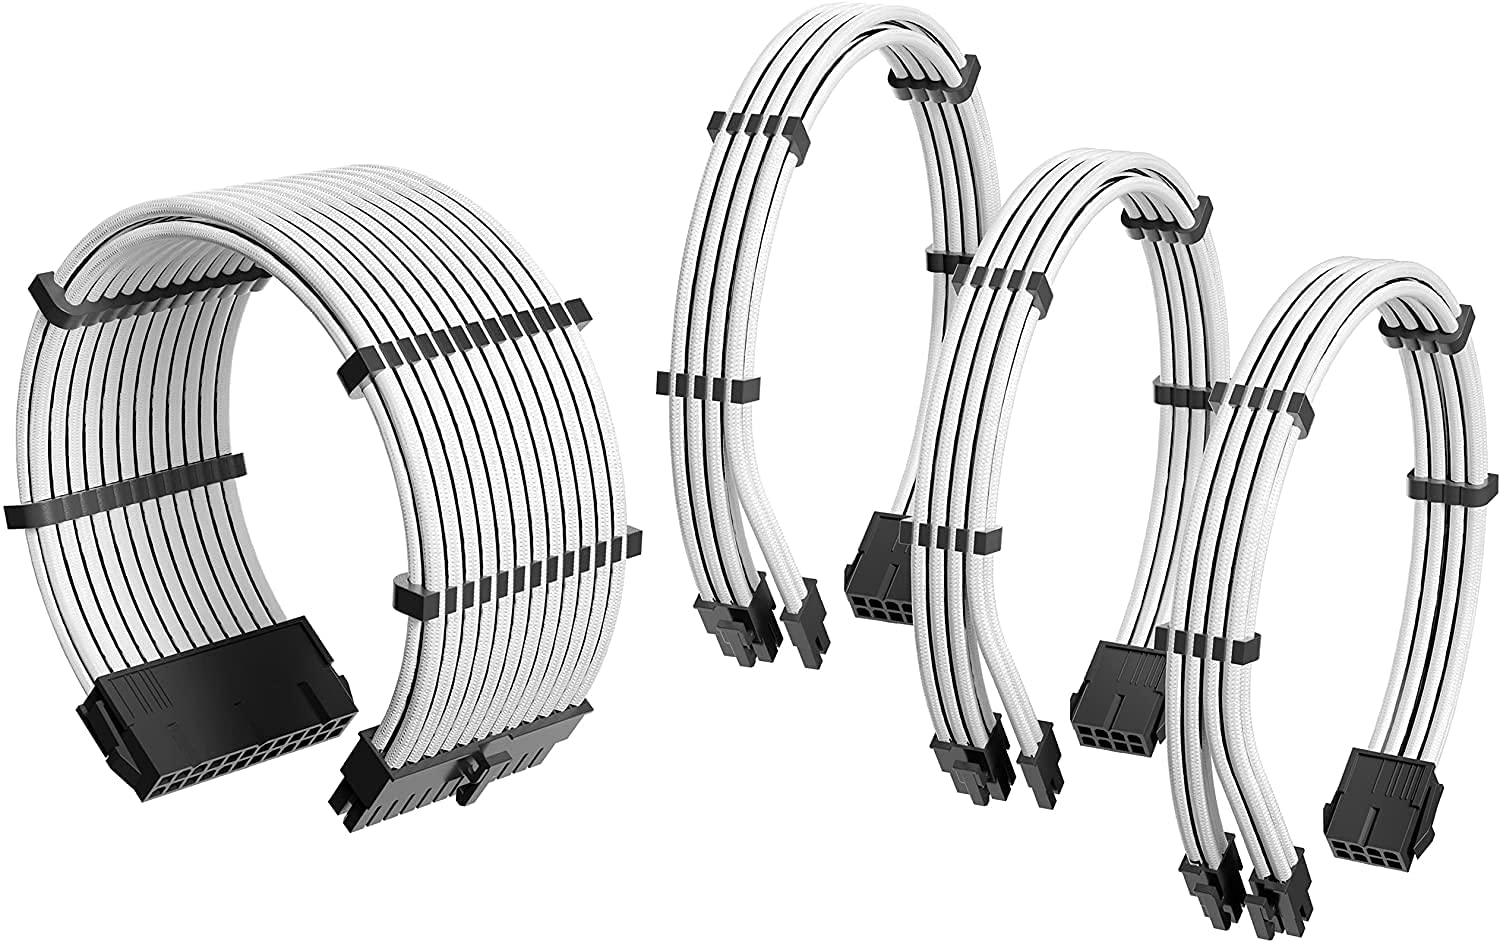 ANTEC PSU - Sleeved Extension Cable Kit V2 - White/Black - 24PIN ATX, 4+4 EPS, 8PIN PCI-E, 6PIN PCI-E, Compatible with Standard PSU